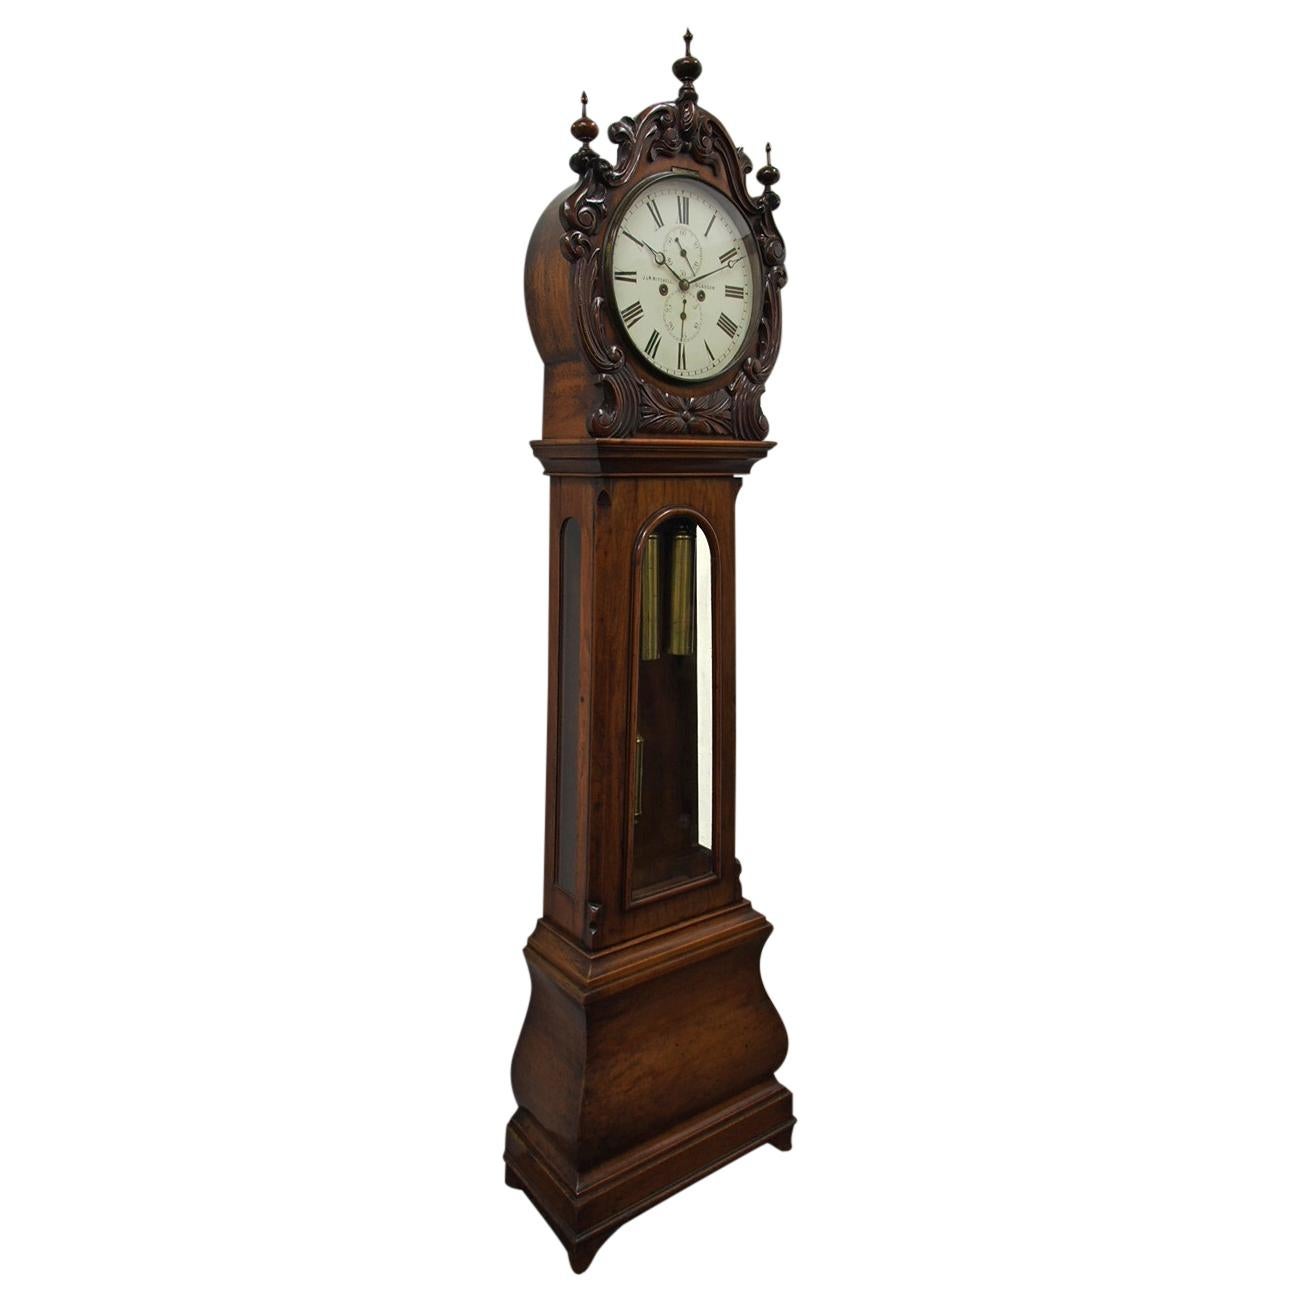 Exhibition quality carved drum head, glazed door grandfather clock by J. W. Mitchell of Glasgow, circa 1860. In the classic style of the period, the drum head is profusely carved with designs of C-scrolls and flower heads, and the face has the